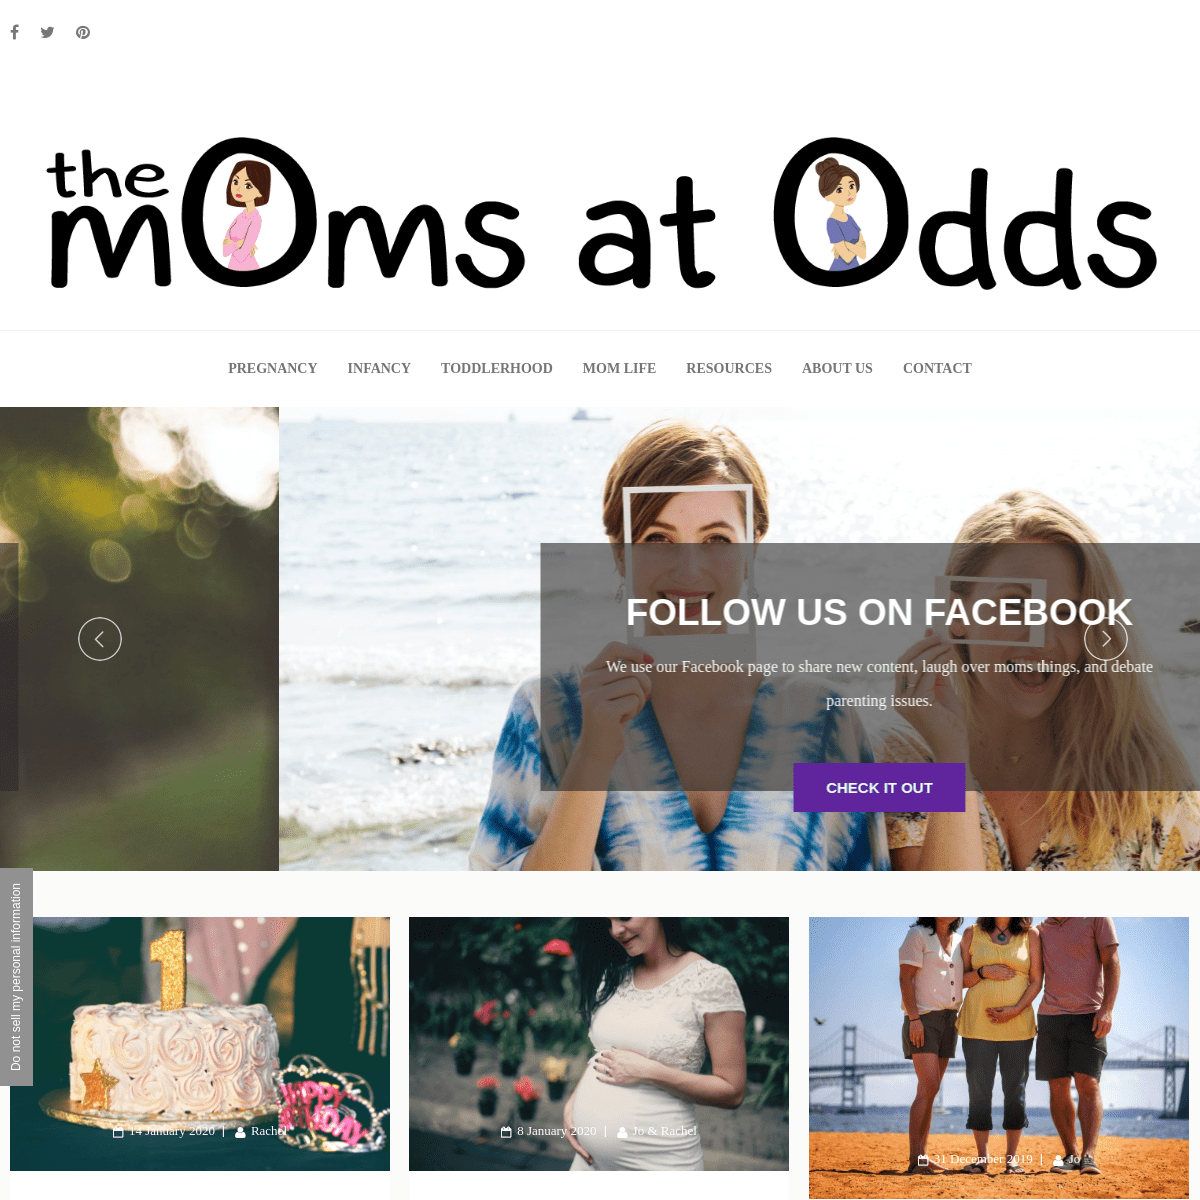 A complete backup of themomsatodds.com